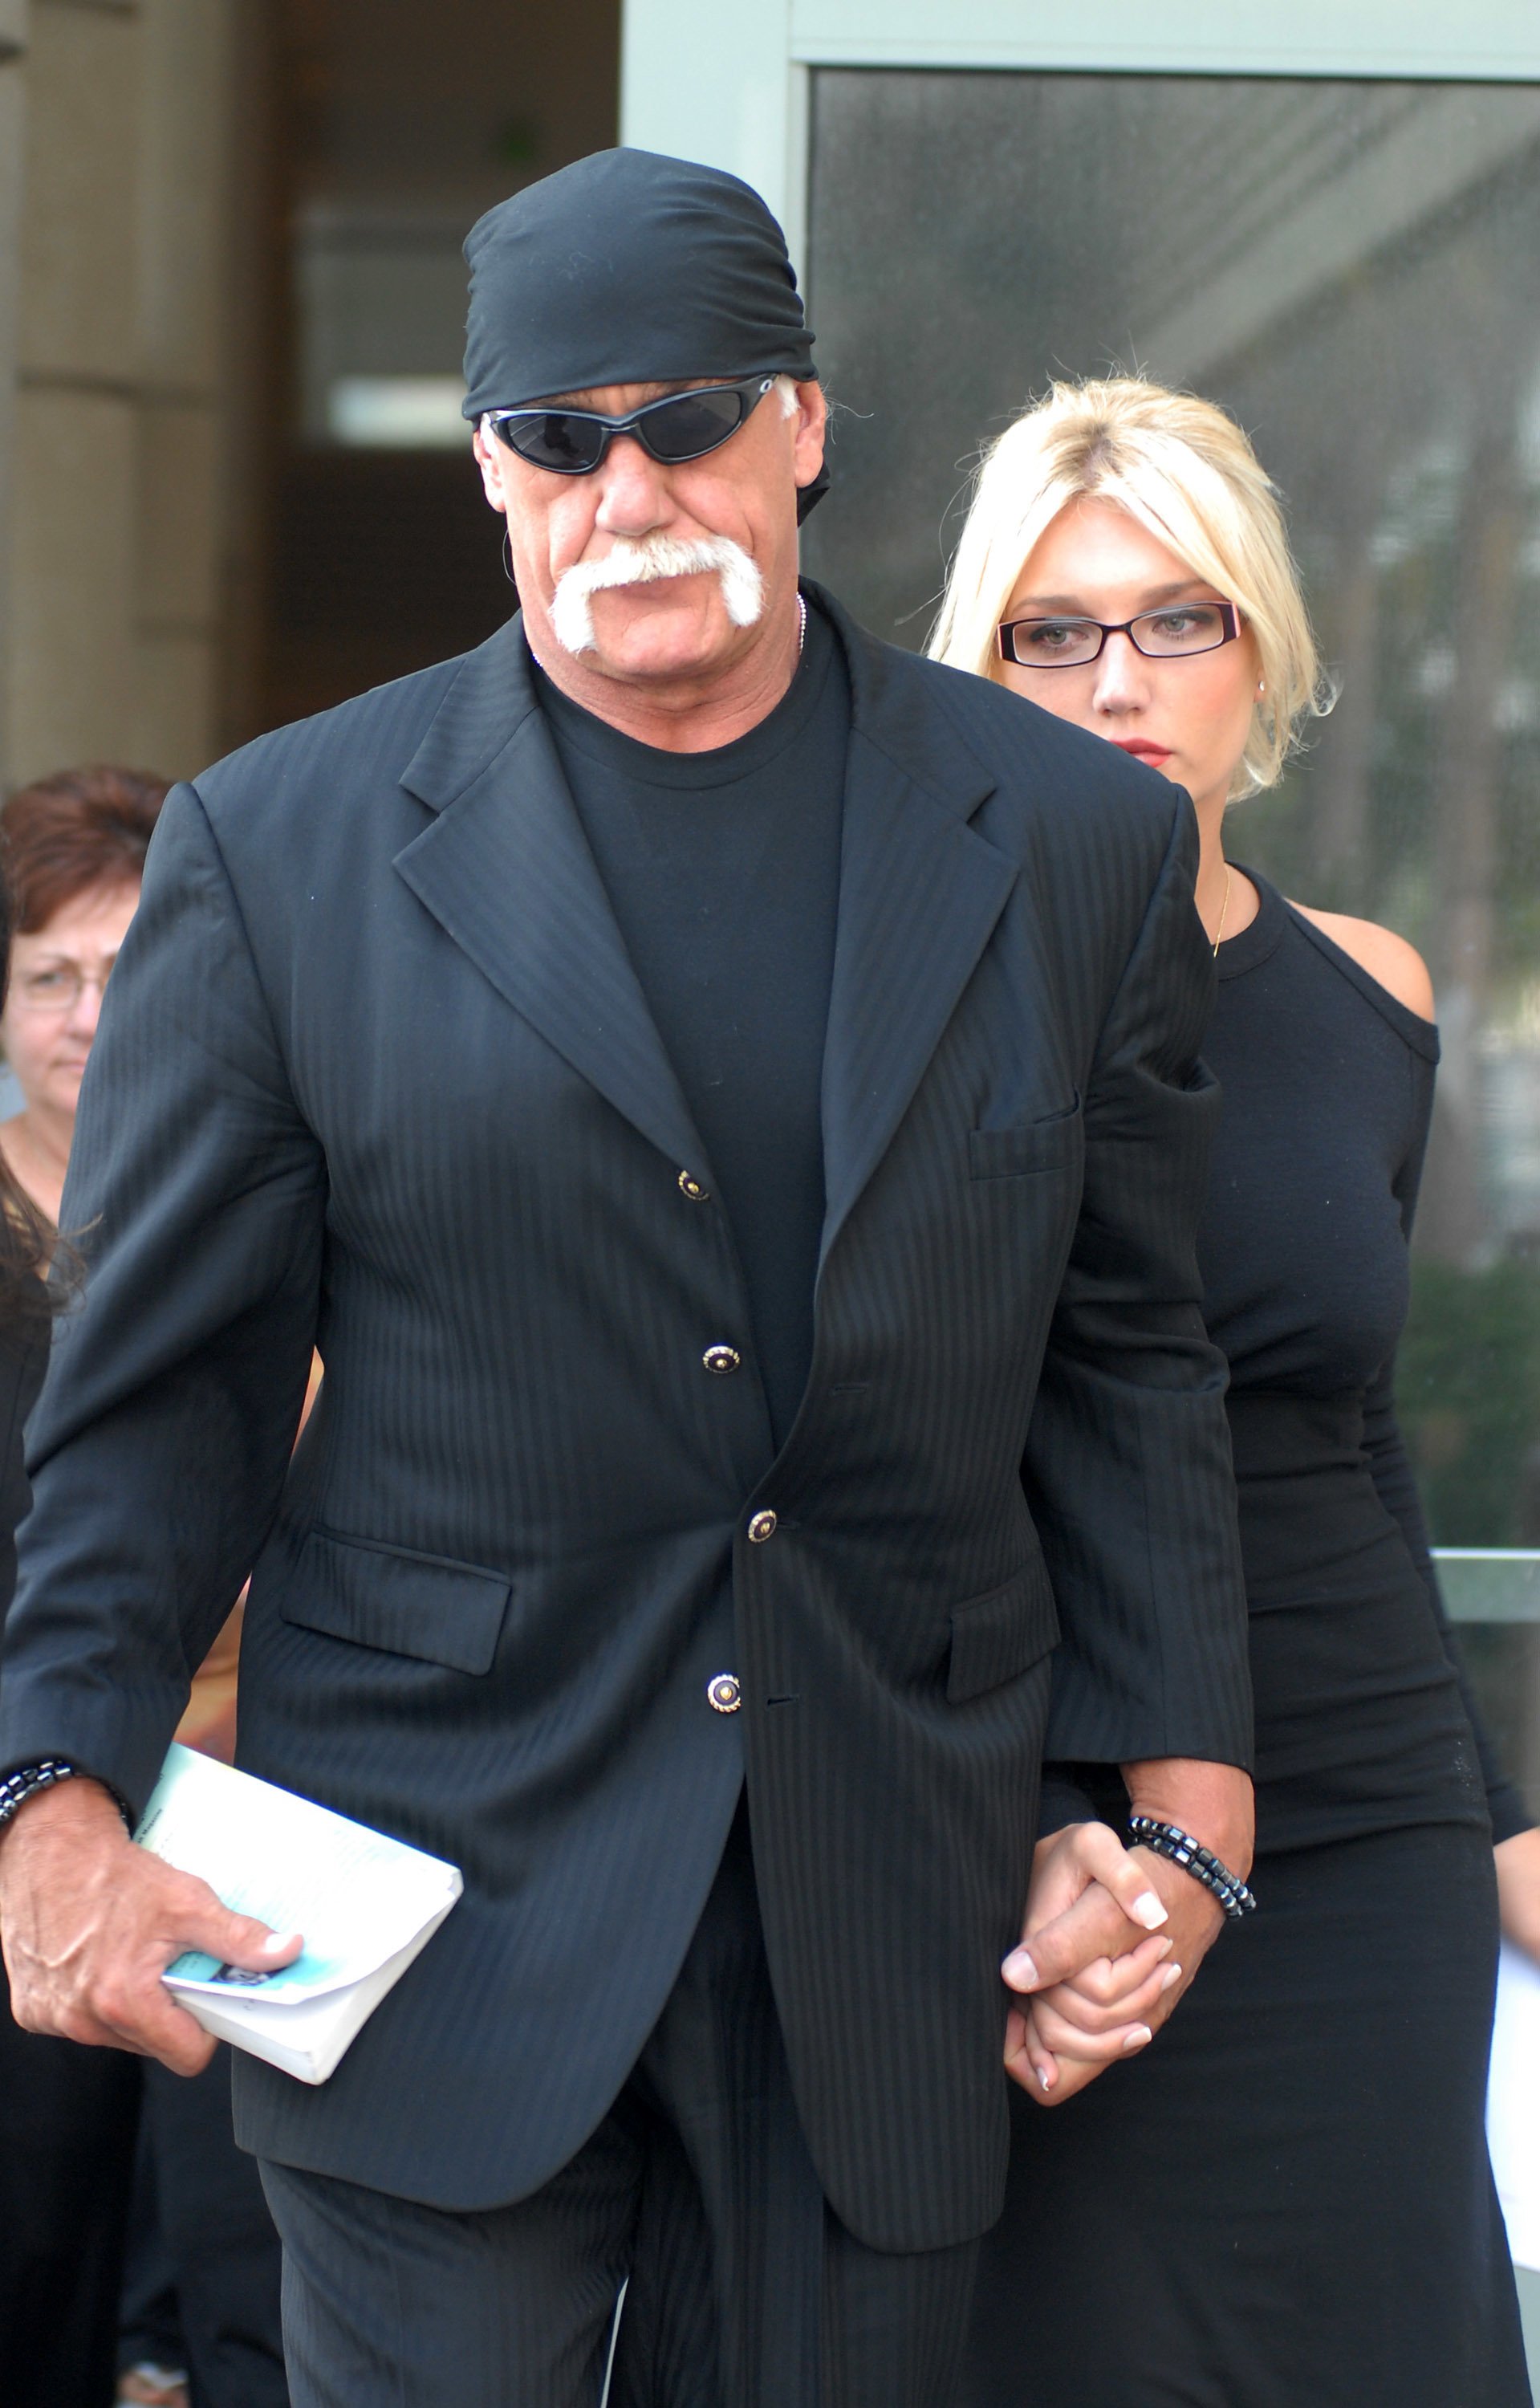 Hulk Hogan and daughter Brooke Hogan on May 9, 2008, in Clearwater, Florida - Photo: Getty Images